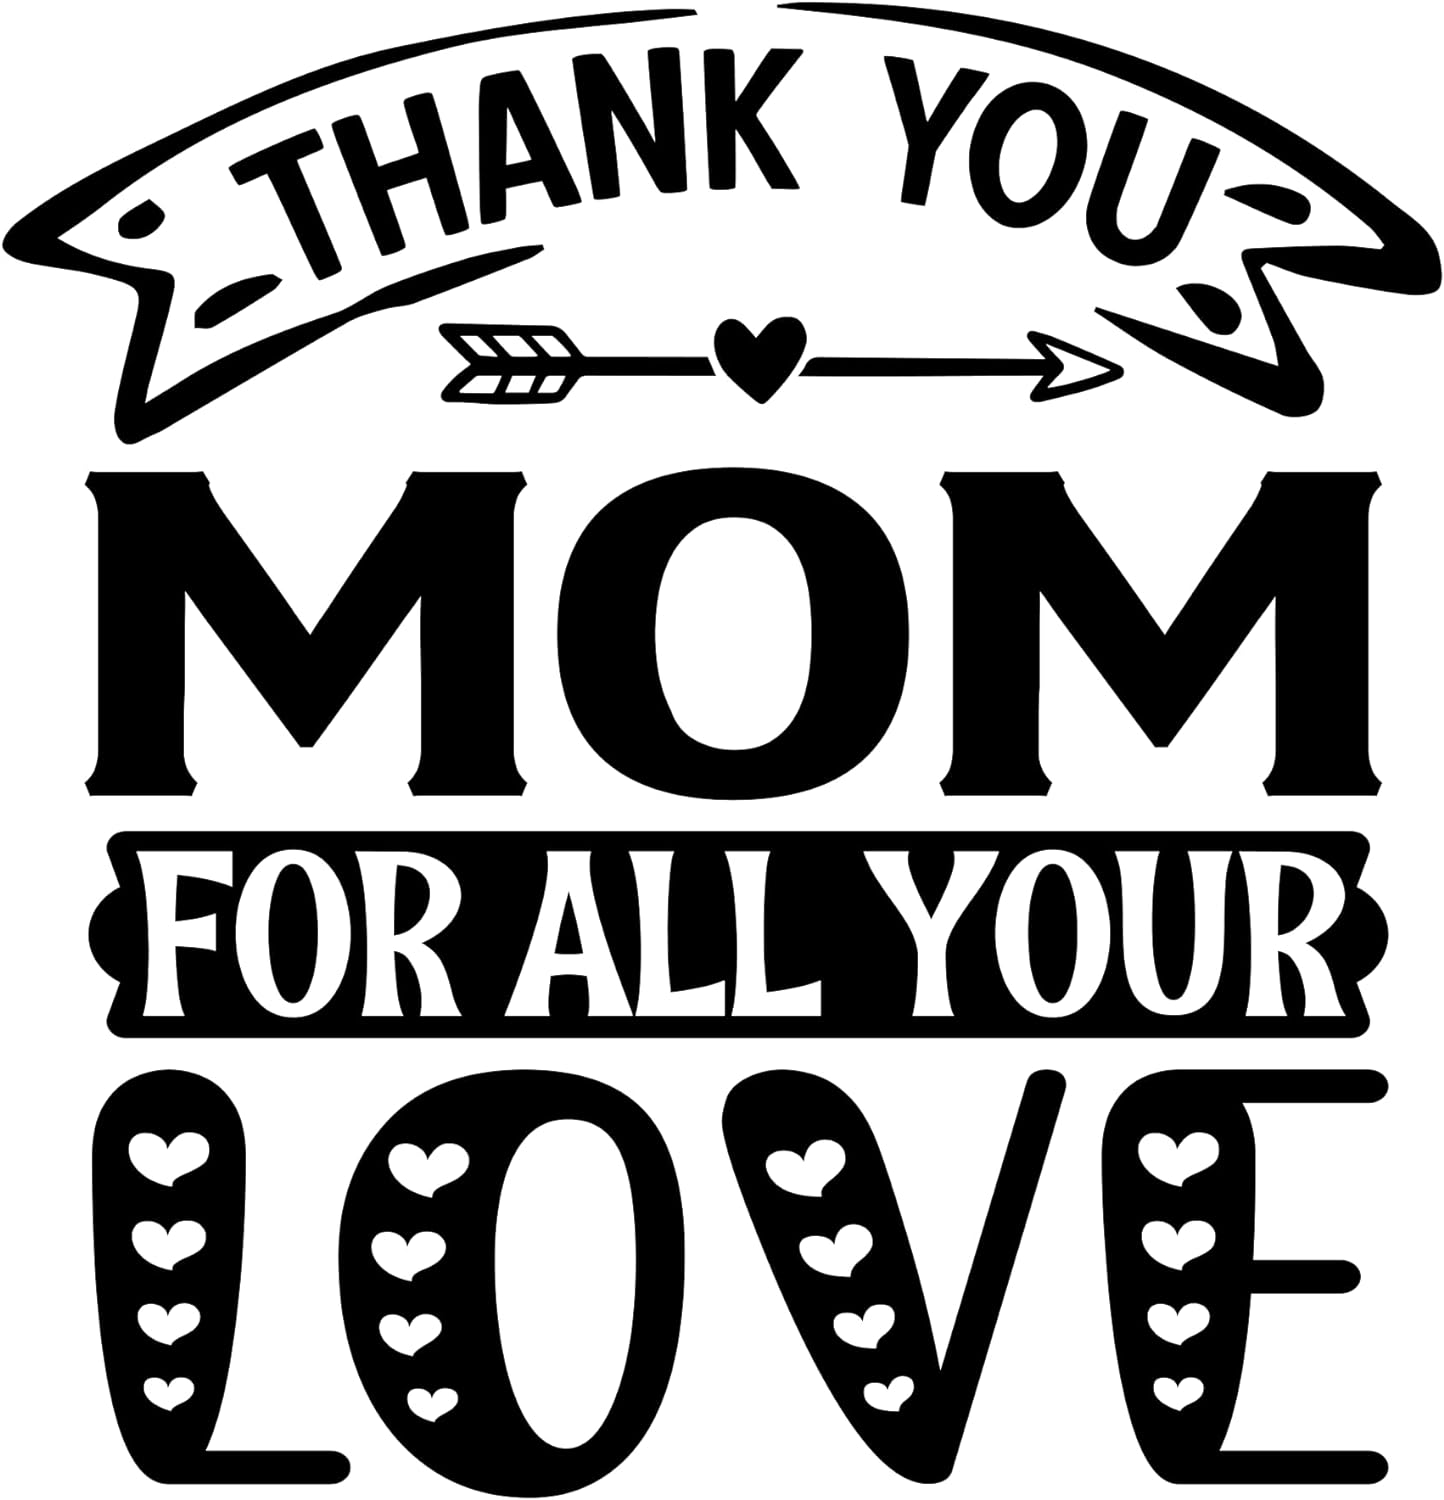 Inspirational Quote "Thank You Mom for All Your Love" Motivational Sticker Vinyl Decal Motivation Stickers- 5" Vinyl Sticker Waterproof